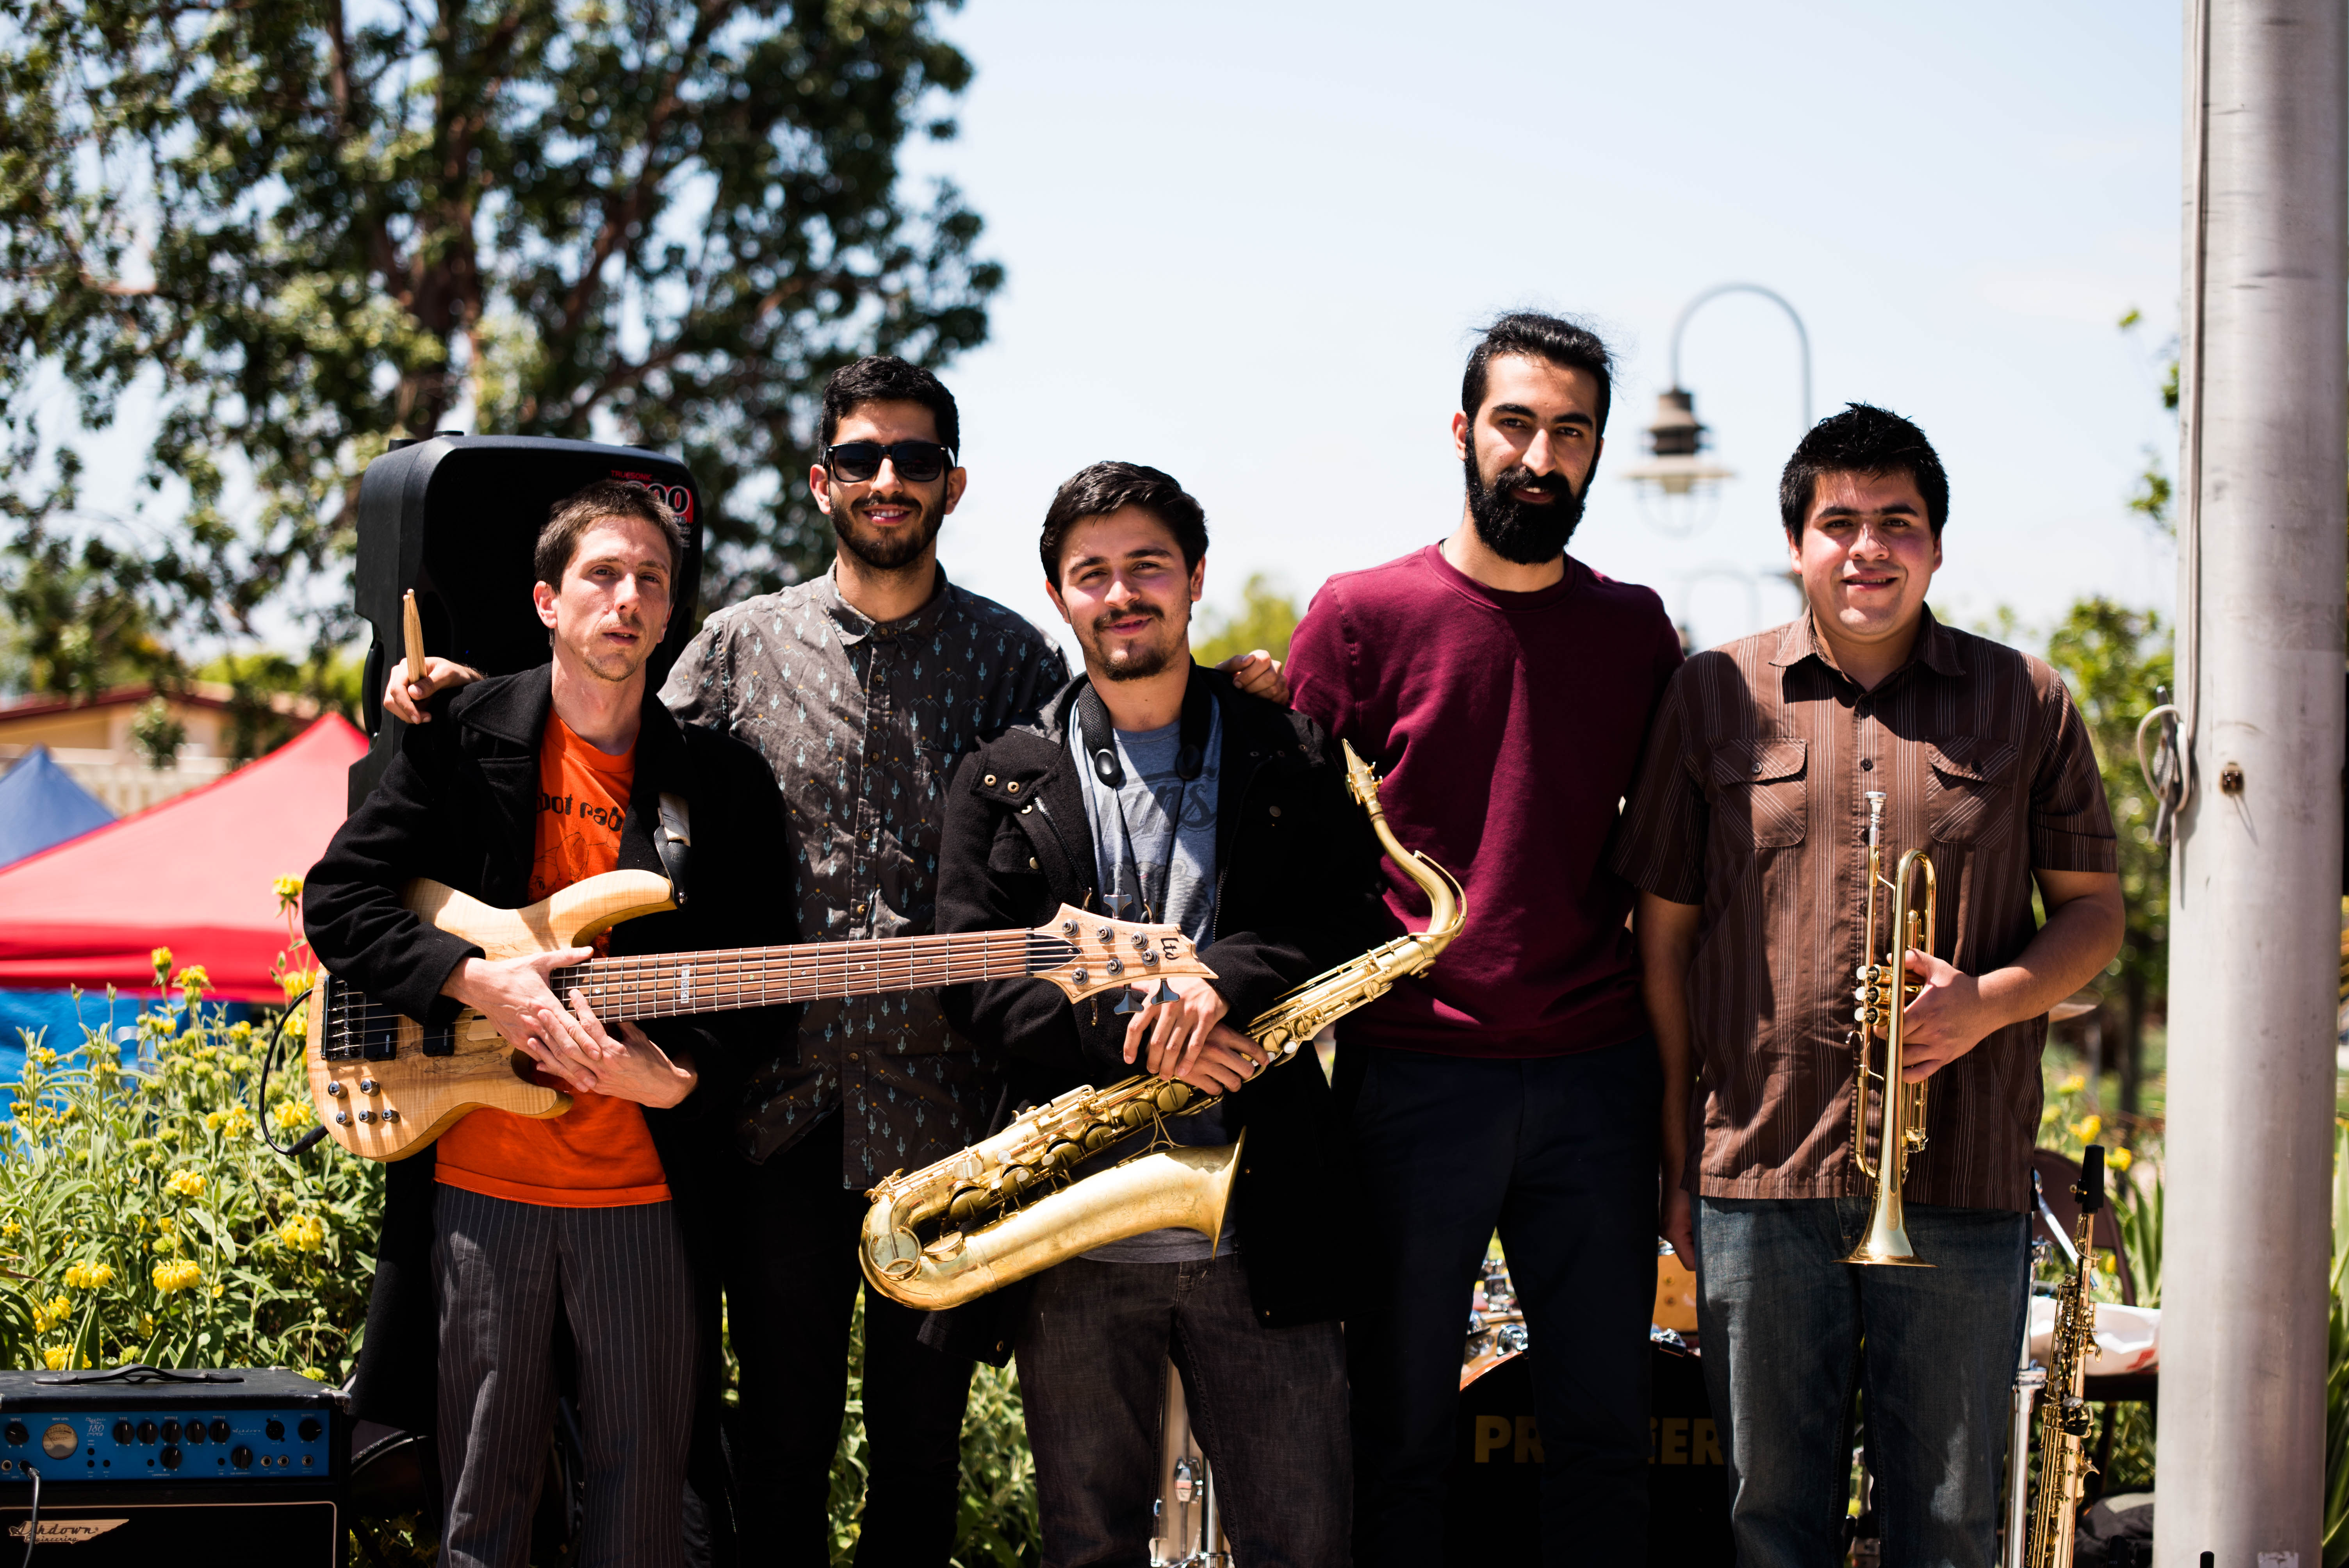 The Dapper Bandits performed at the Springfest held by the Palomar Associated Student Government on April 12 in the SU Quad. The group features (l-r) Shannon Nauss, Koosha Hakimi, Danny Gonzalez, Vafa Samiei, and Aaron Miramontes. The Dapper Bandits are a local band that plays a jazzy, energetic style of music. Johnny Jones/The Telescope